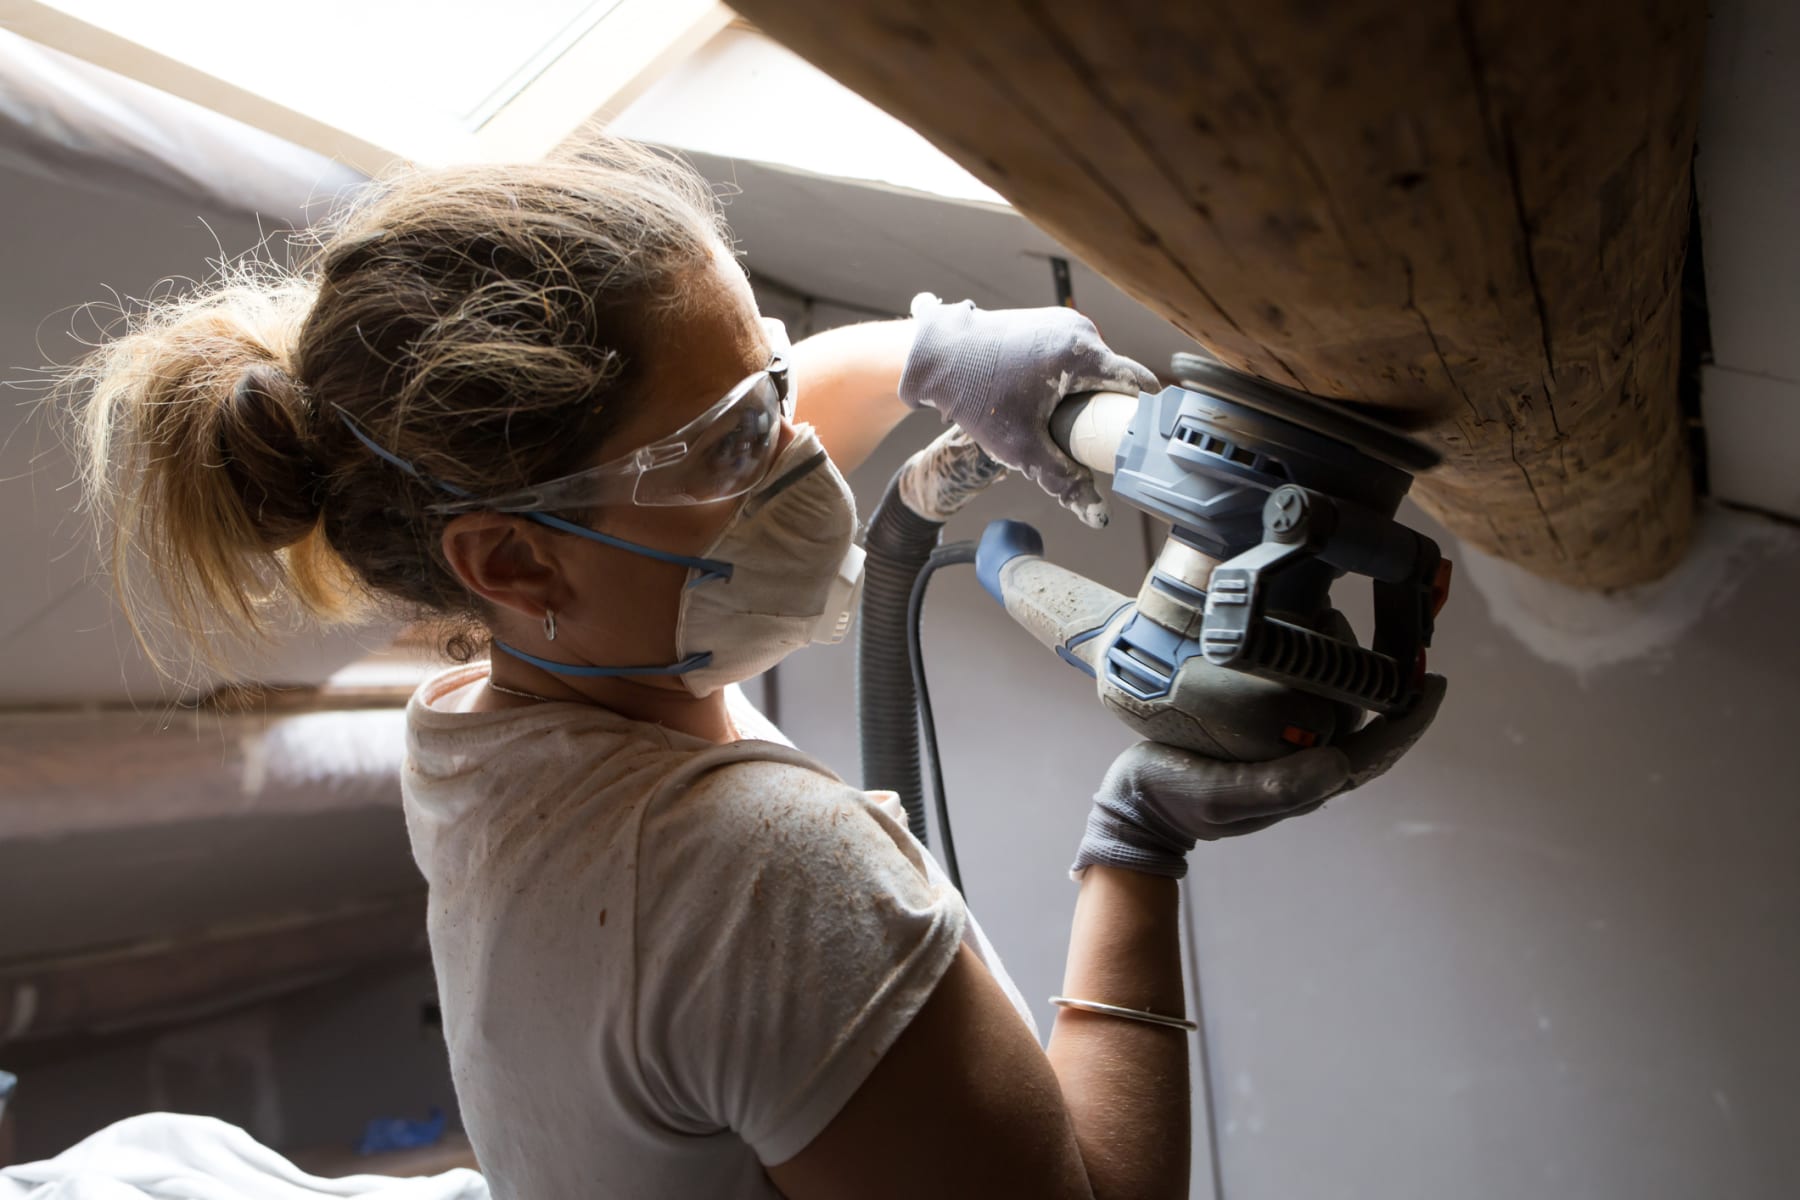 Woman uses power sander for home improvement.